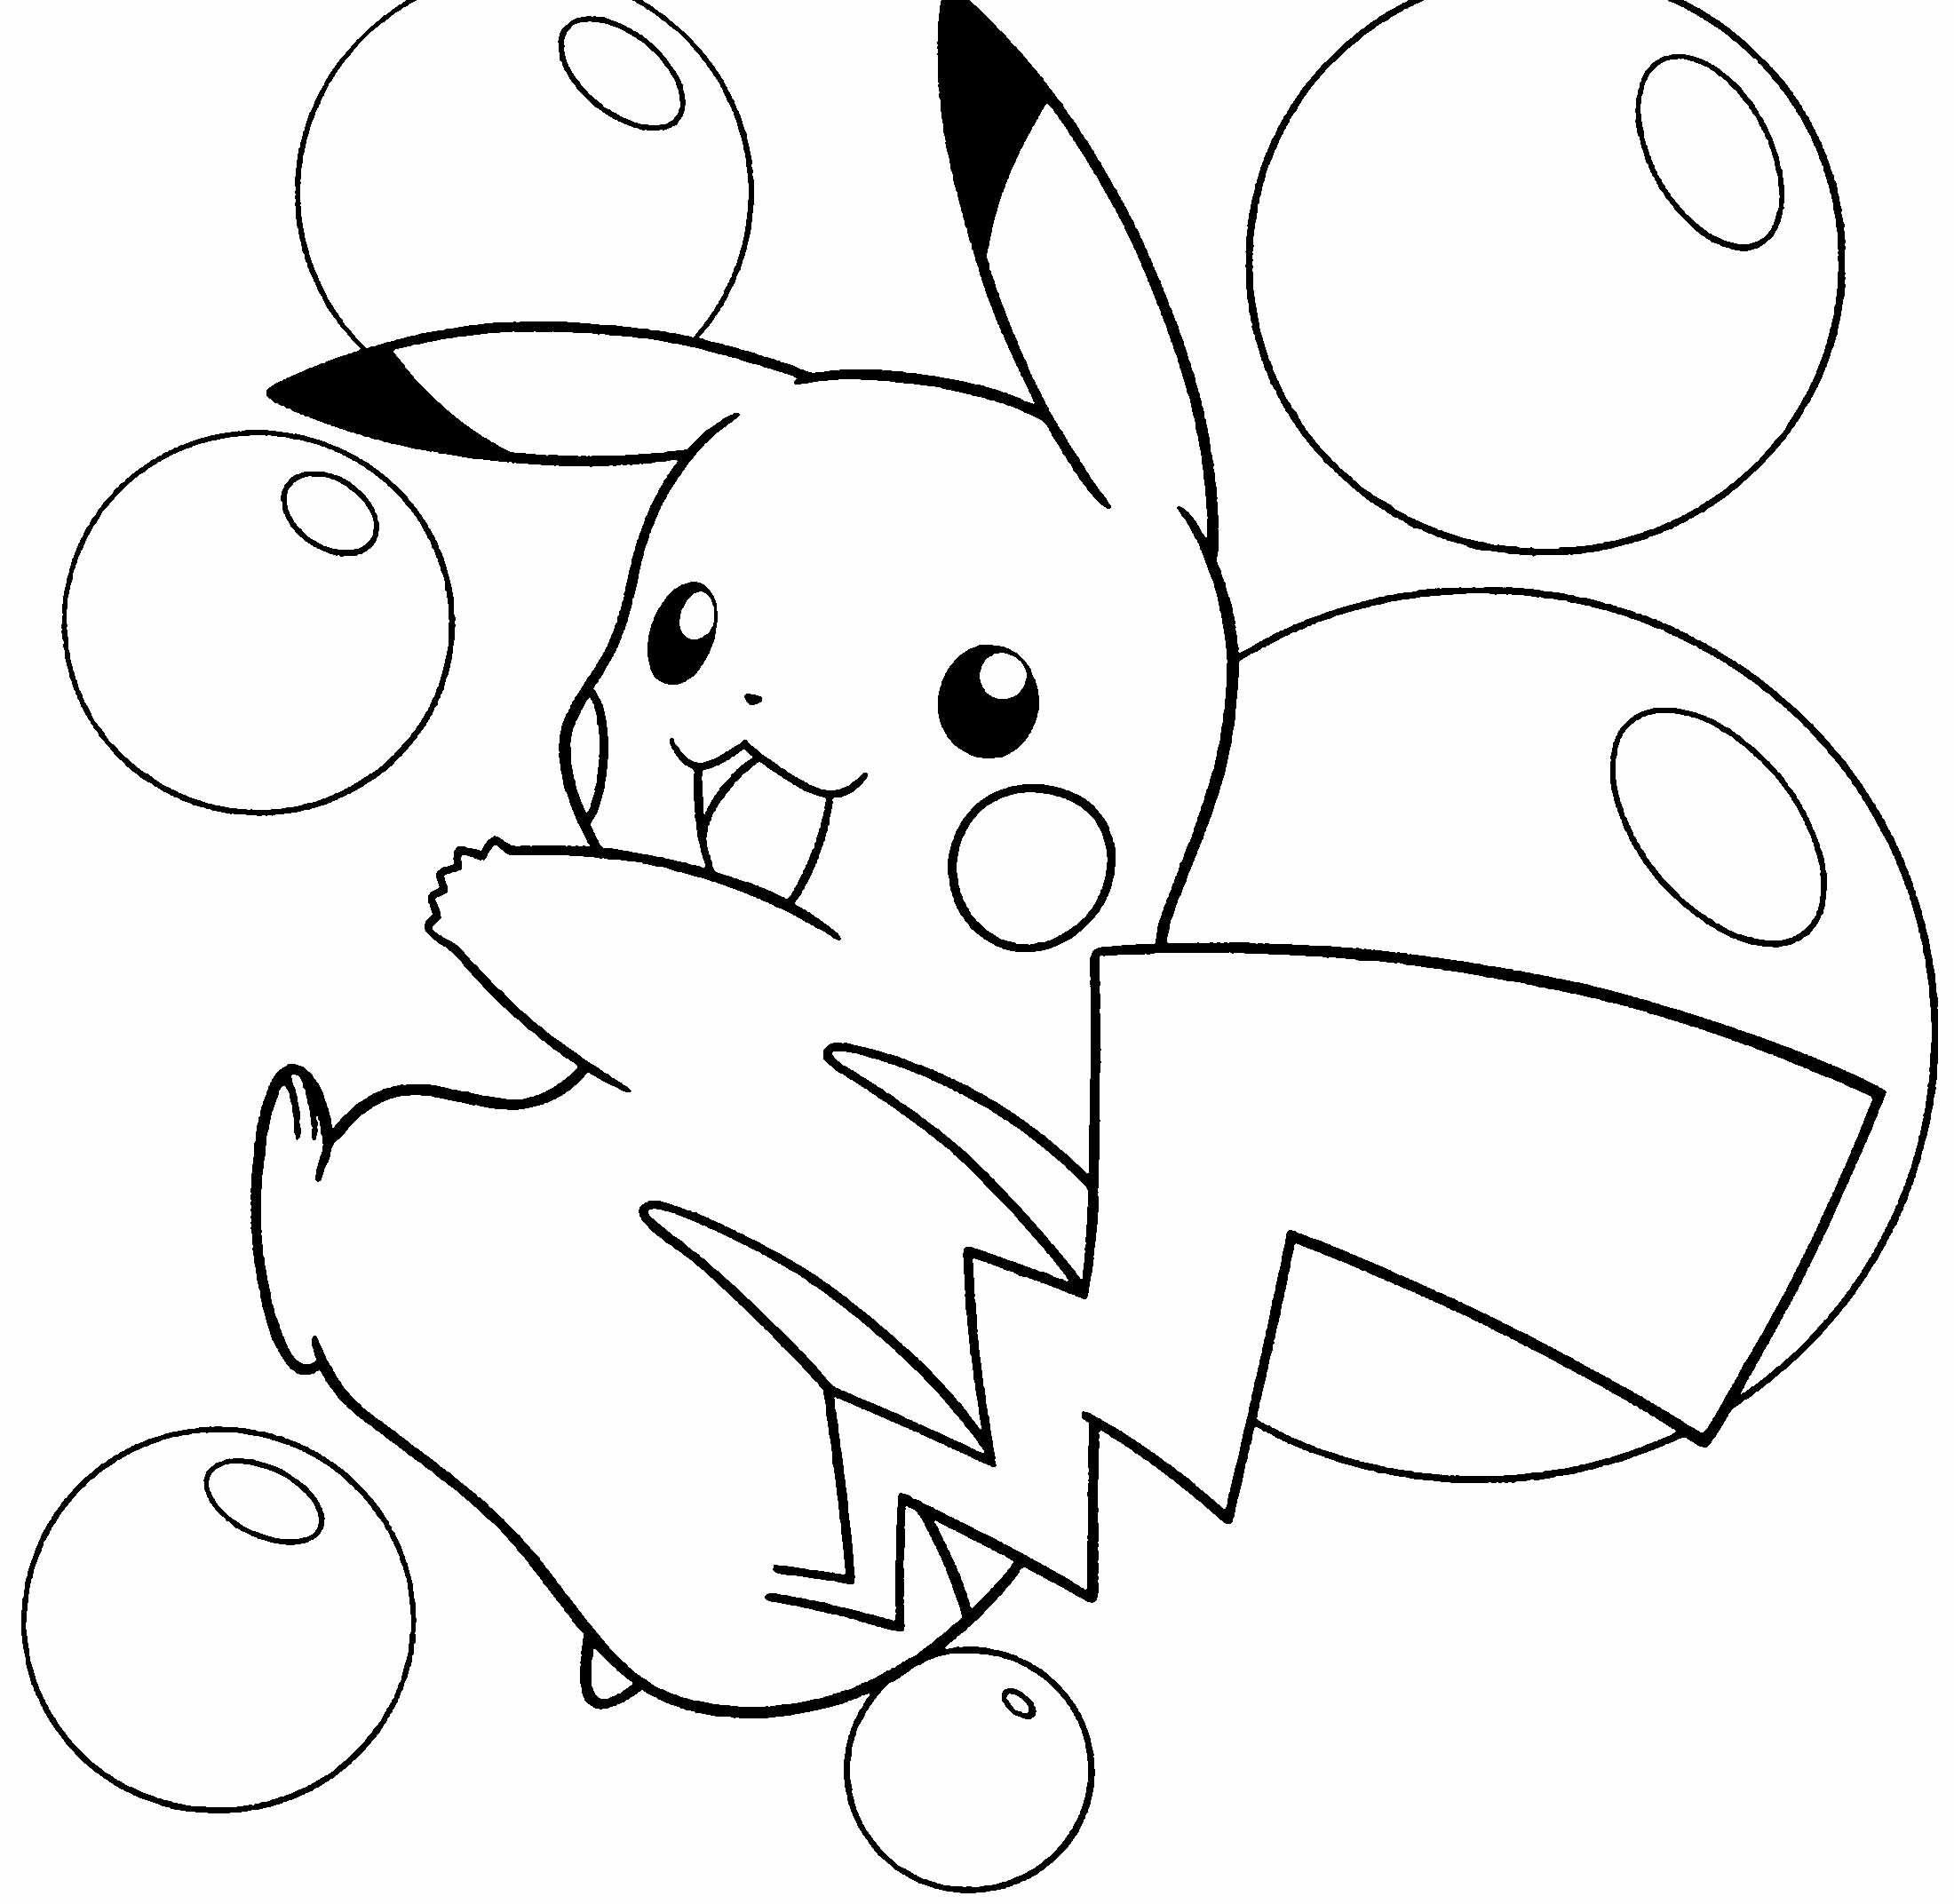 pikachu coloring pages - Free Large Images | Pokemon ...